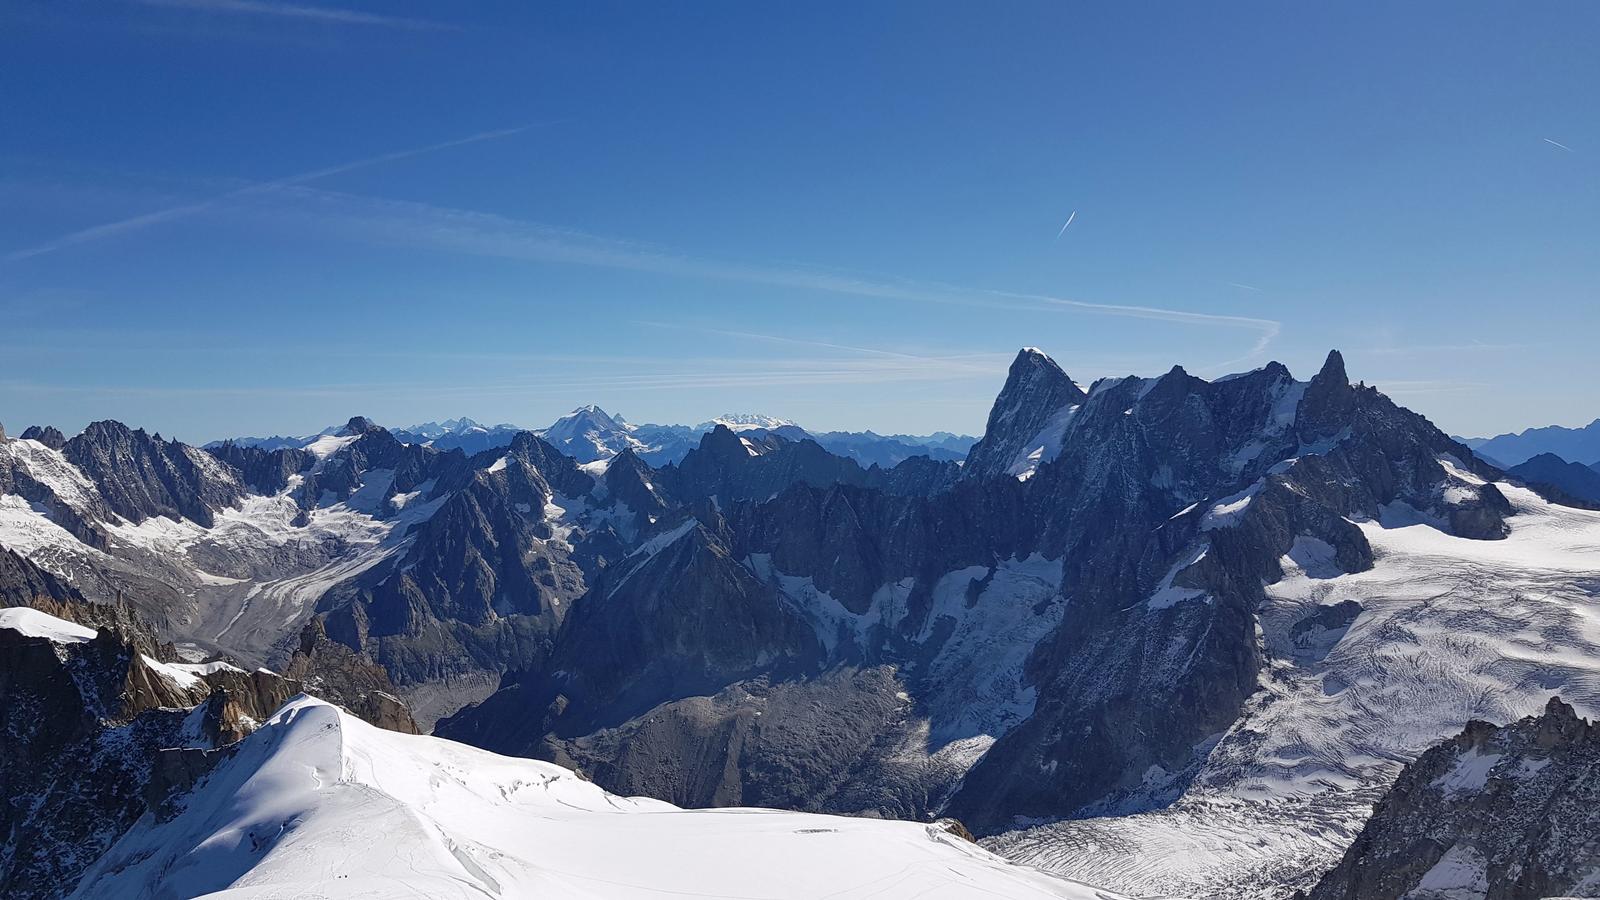 First Terrace at Aiguille